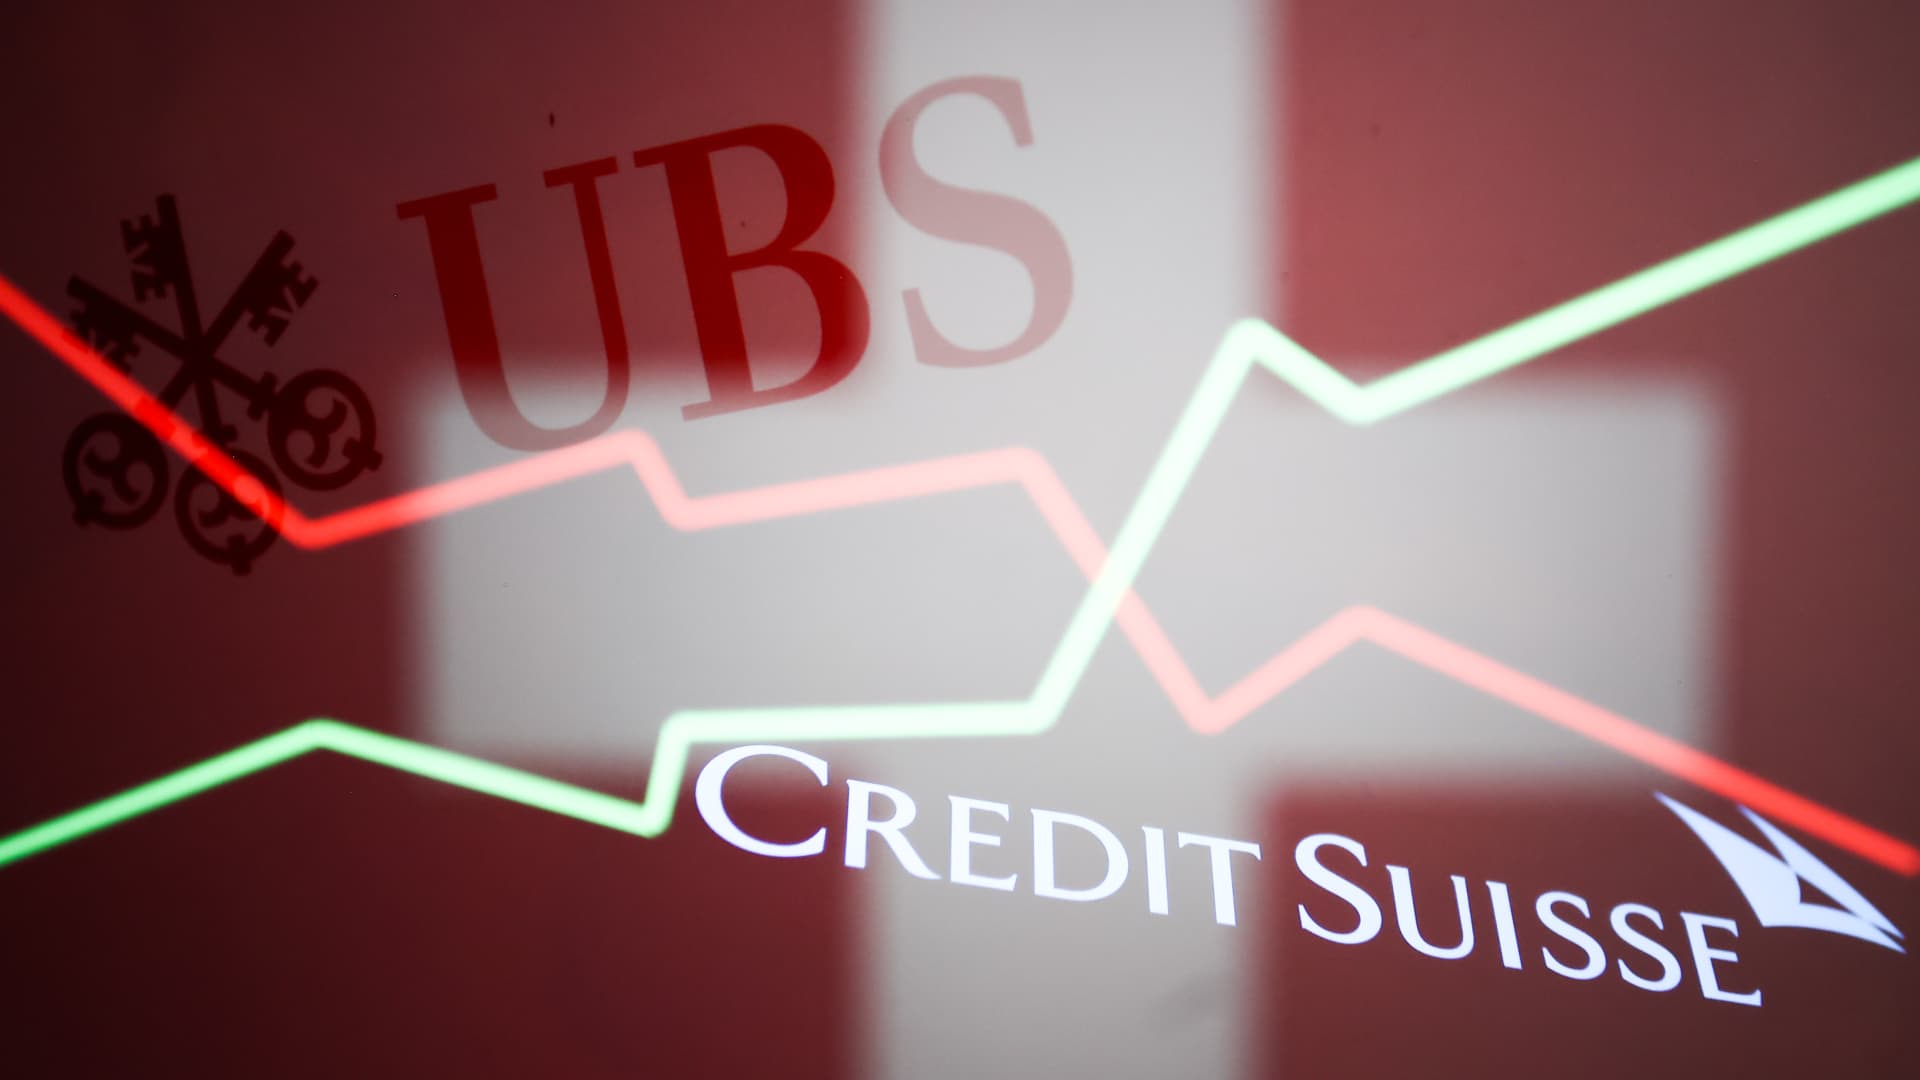 Asia's regulators say banking system is robust and stable after UBS-Credit Suisse takeover deal - CNBC image